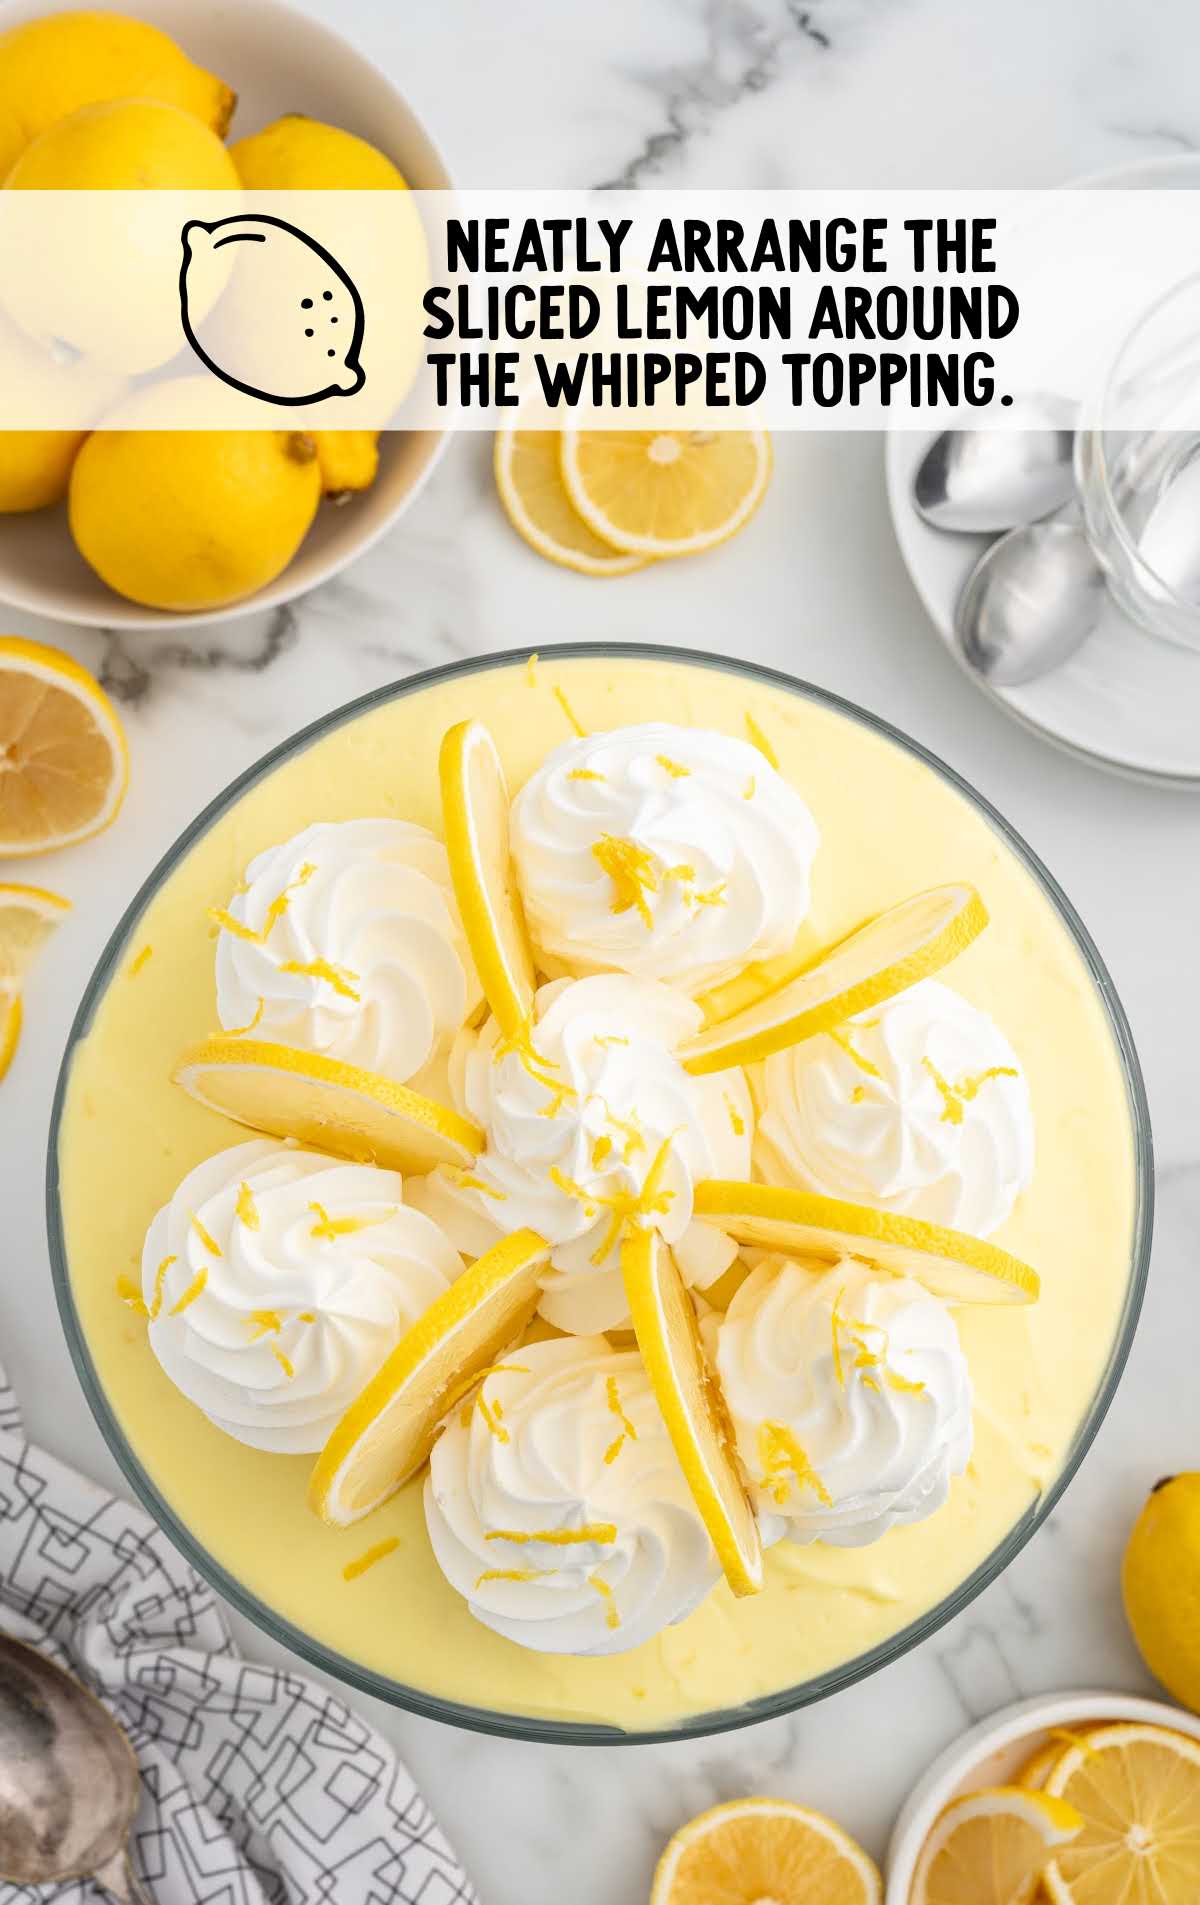 Lemon Trifle topped with lemon slices around the whipped cream swirls 